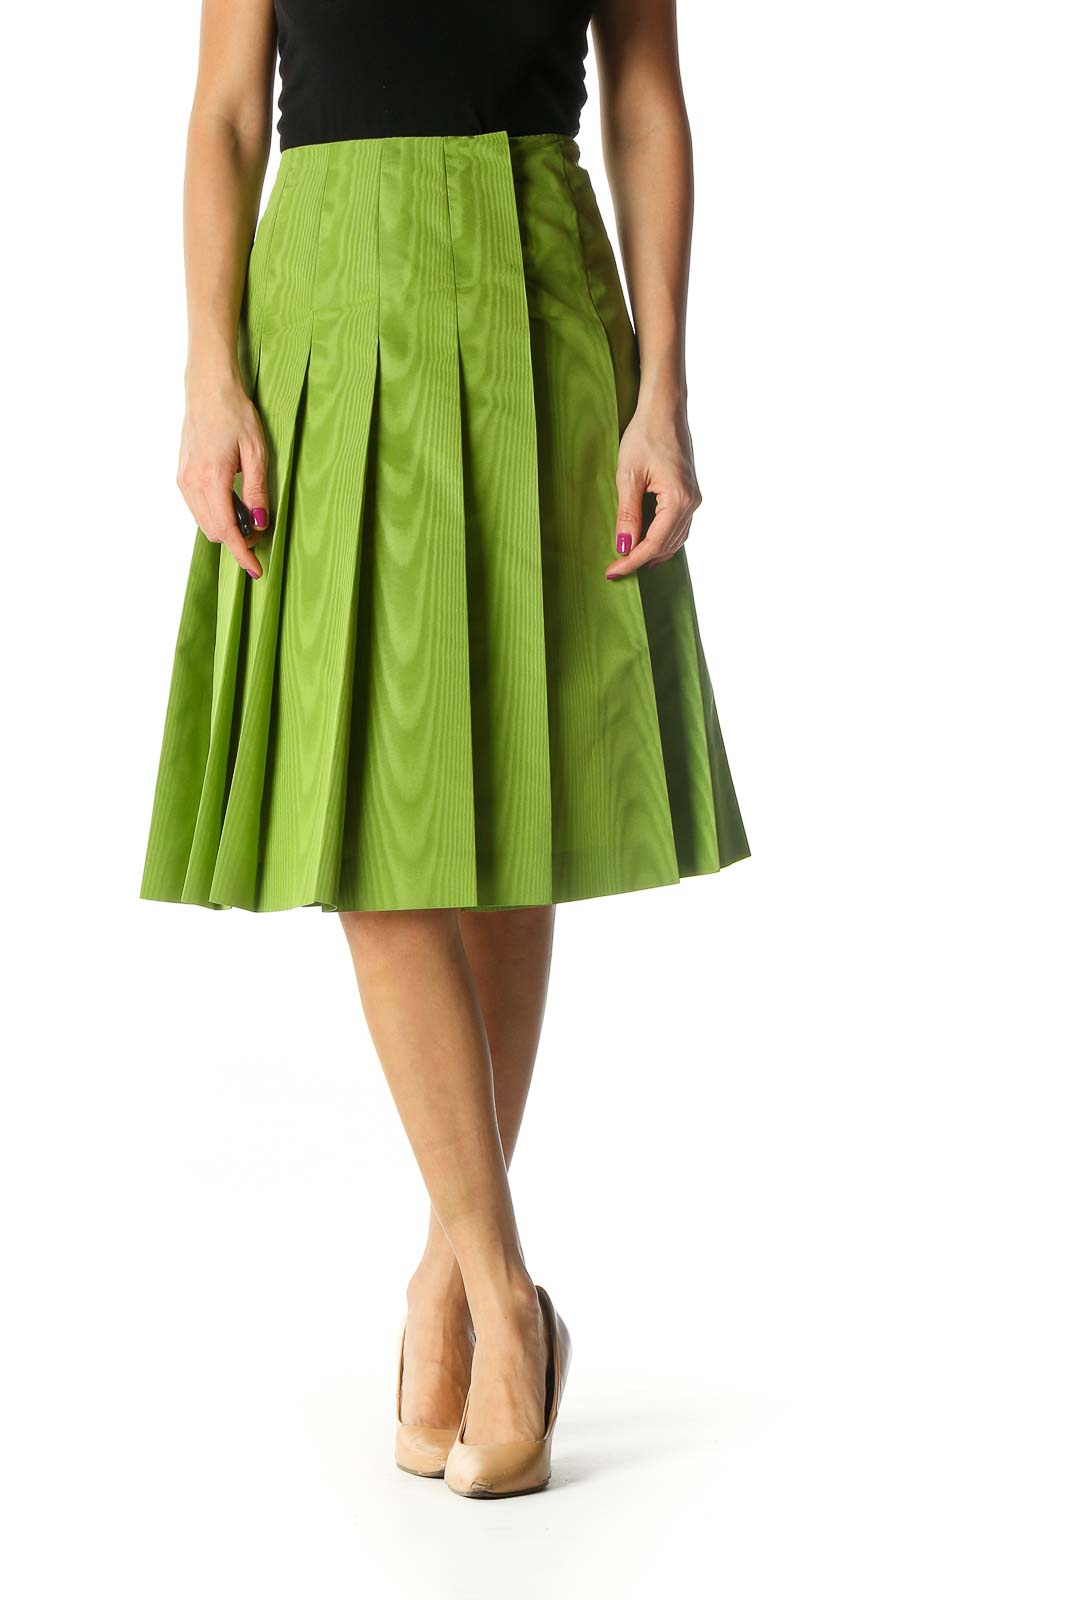 Green Solid Retro Pleated Skirt Front